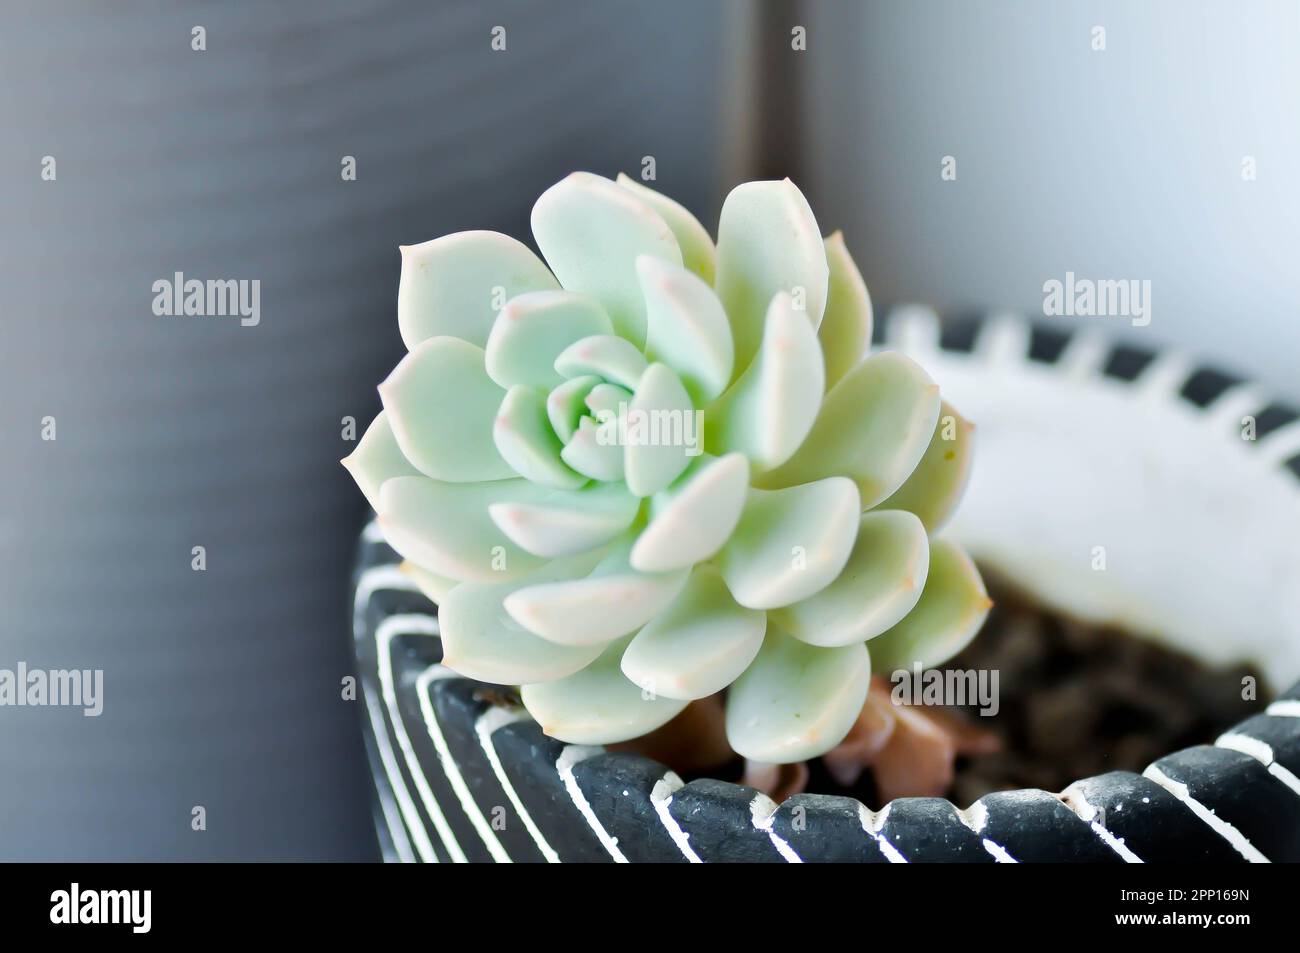 Kalanchoe, Kalanchoideae or Crassulaceae or K blossfeldiana or Magnoliophyta or succulent or cactus in the flowerpot Stock Photo